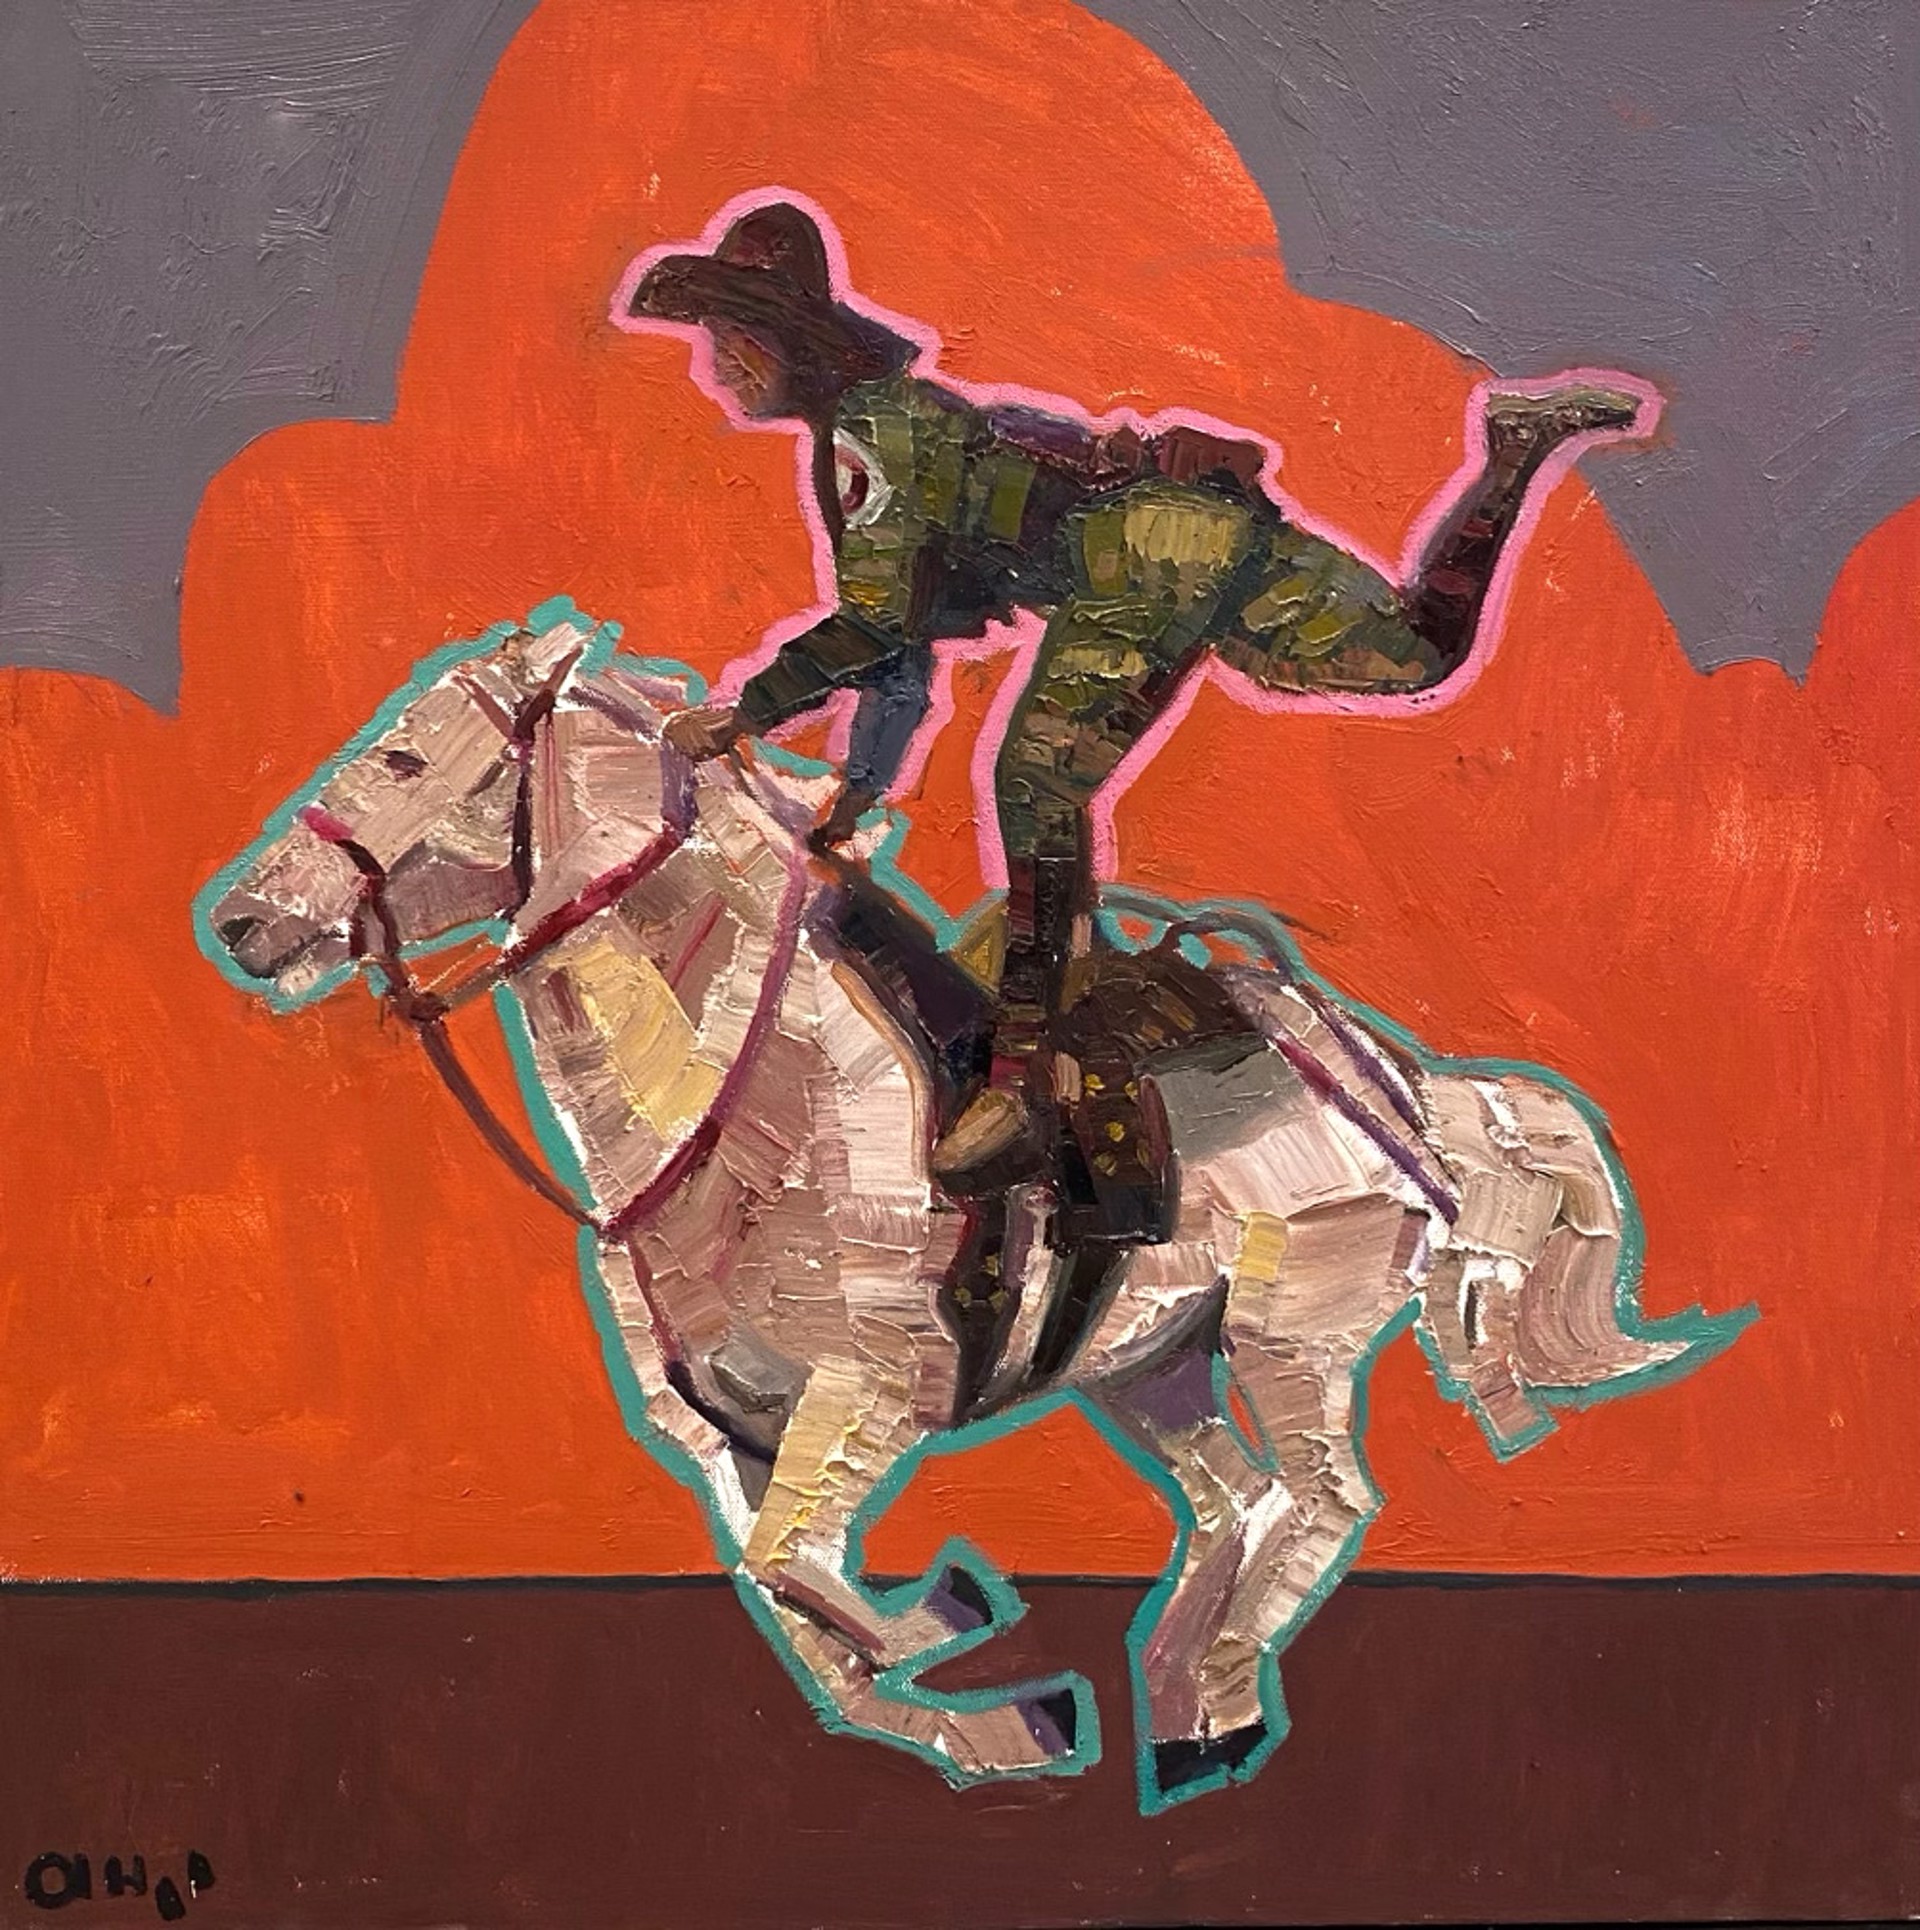 Original Oil Painting By Aaron Hazel Of A Trick Rider